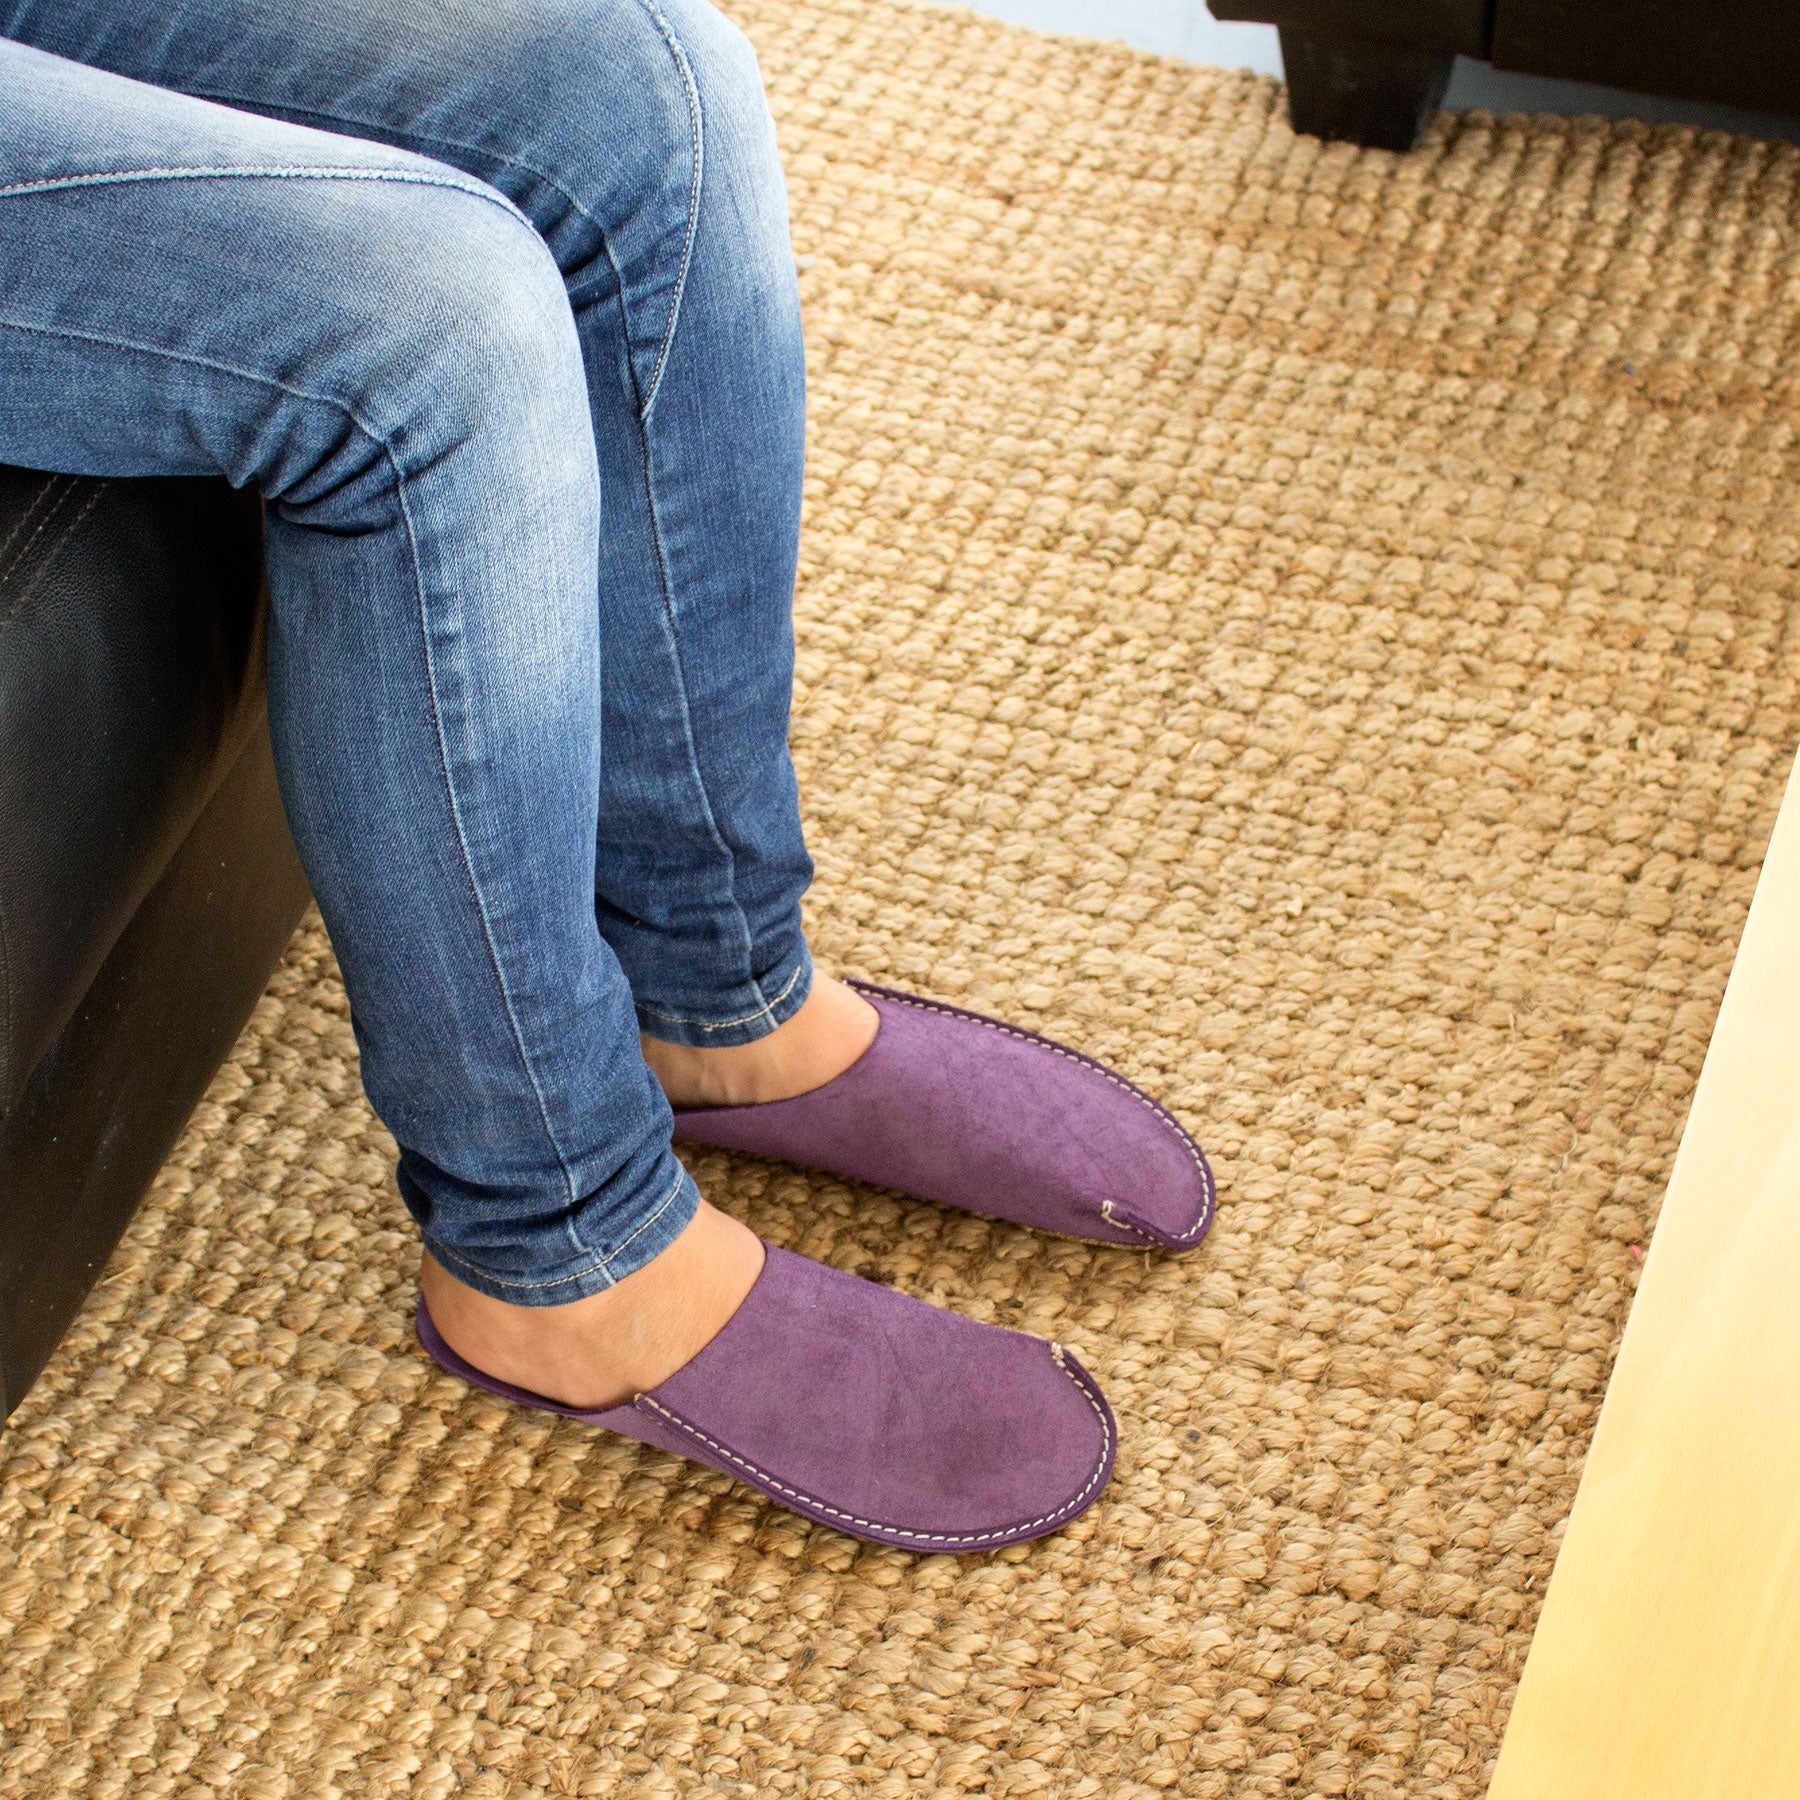 Violet CP Slippers Luxe - CP Slippers